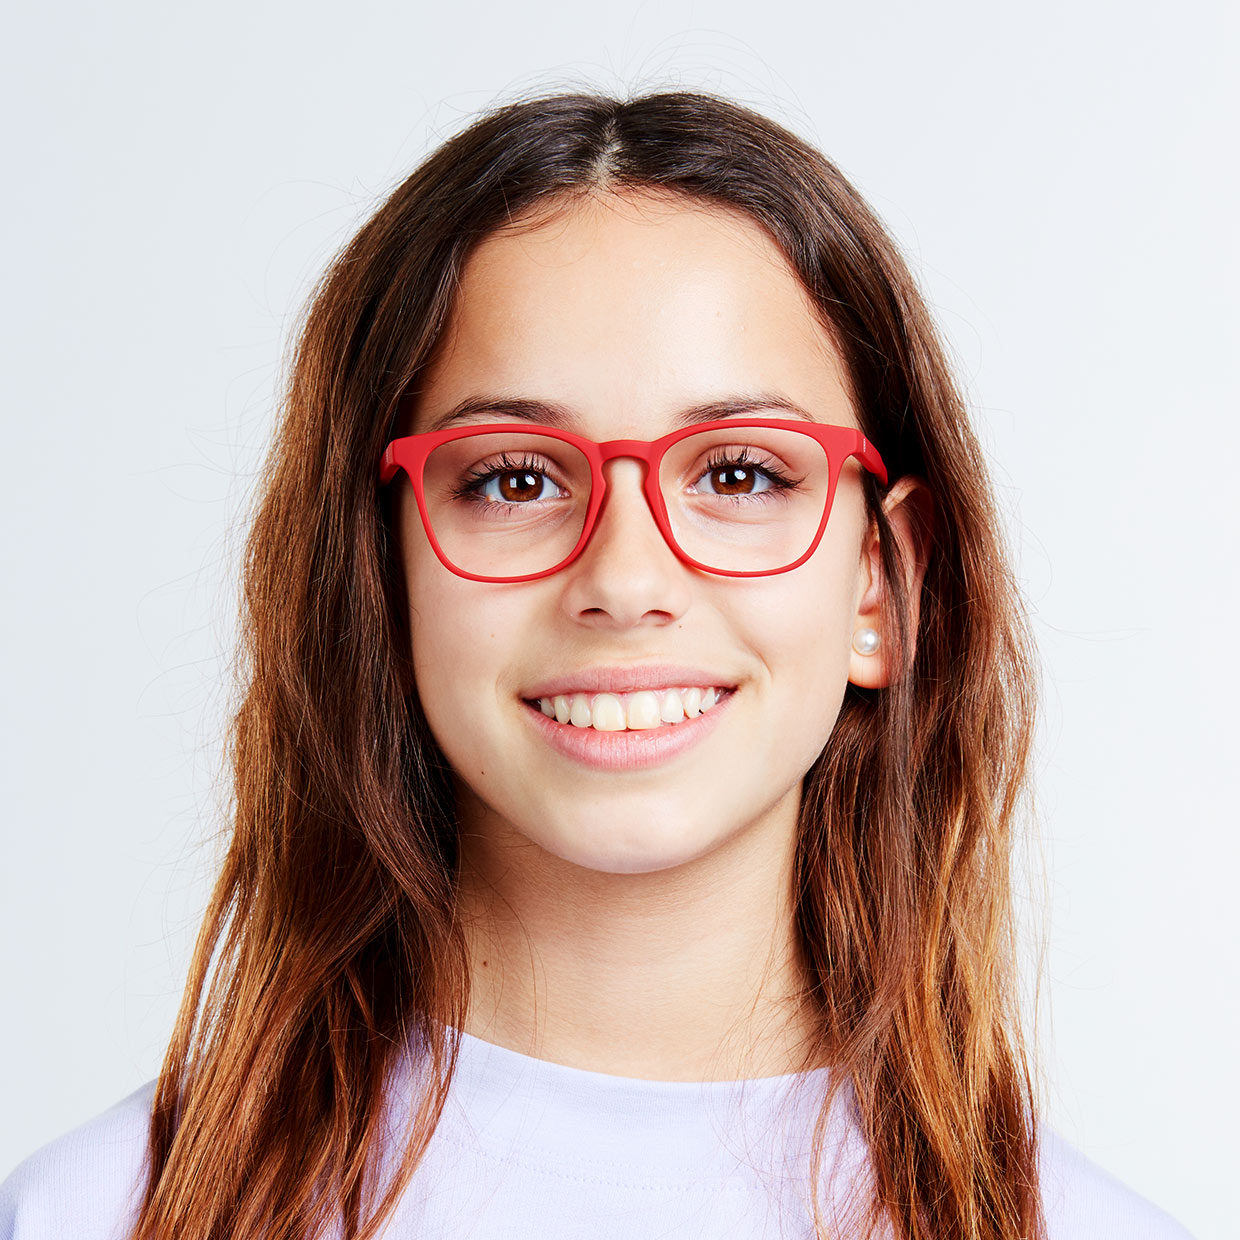 Dalston Ruby Red Screen Glasses